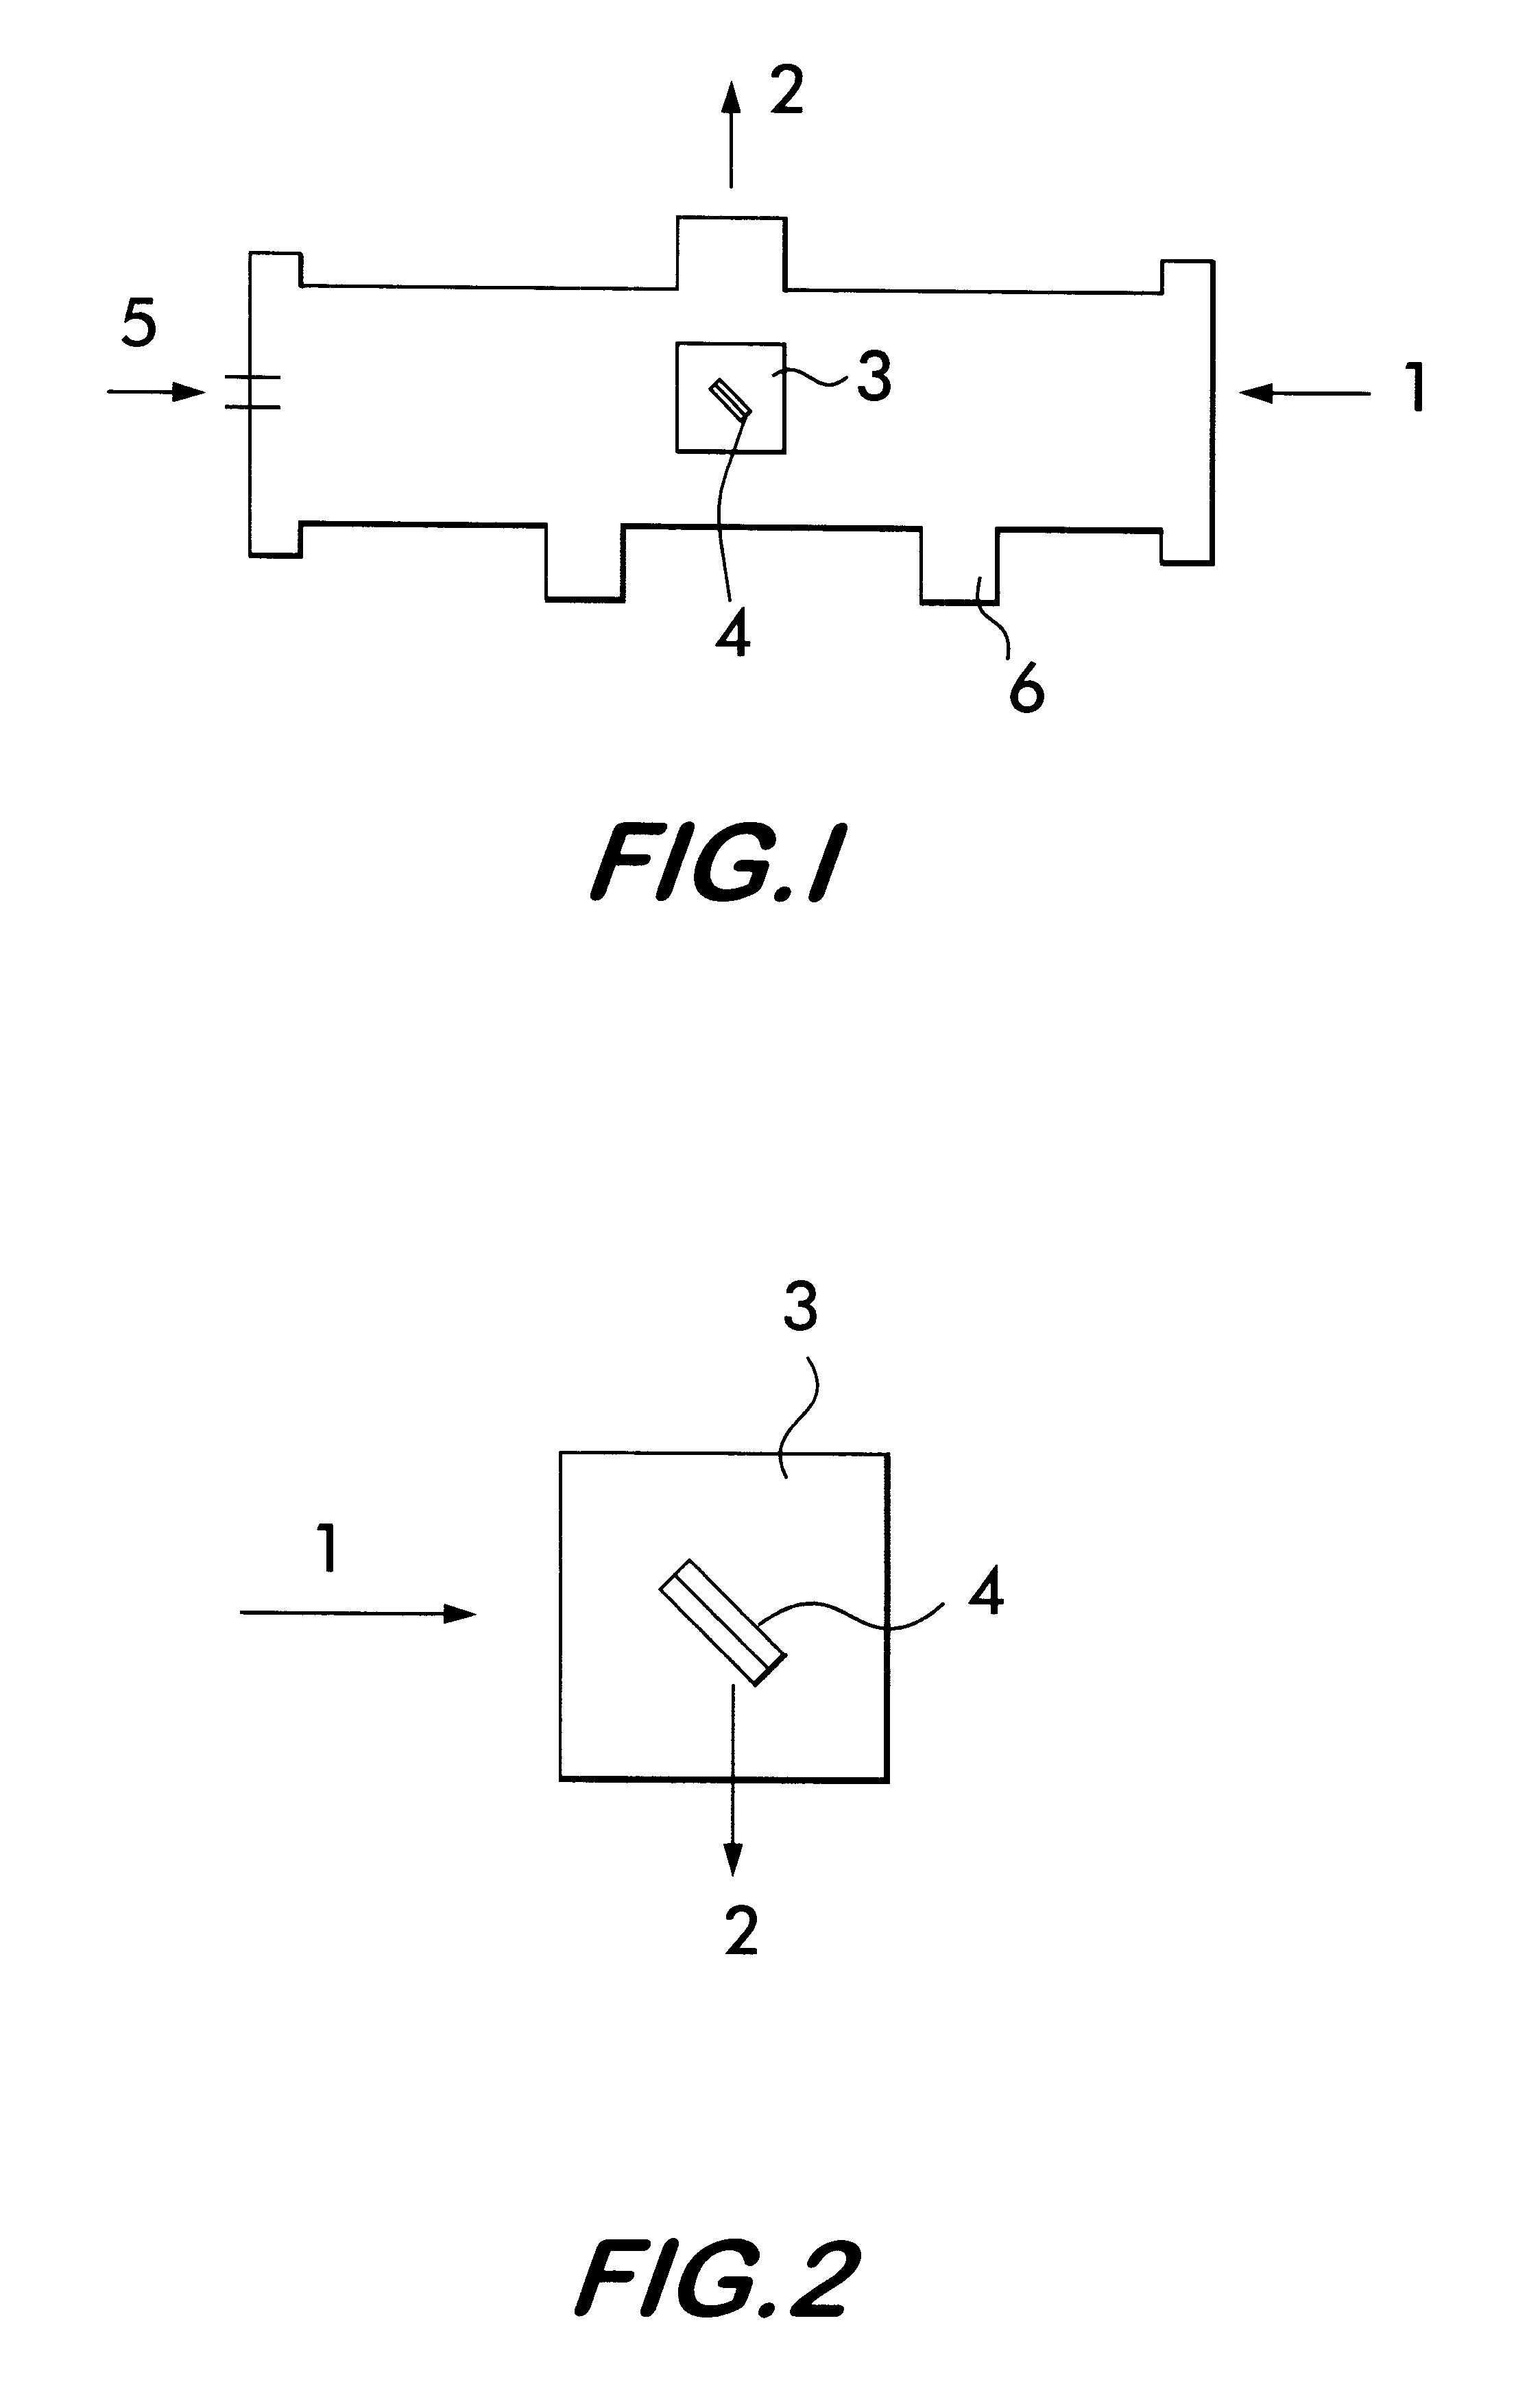 Diamond thin film or the like, method for forming and modifying the thin film, and method for processing the thin film